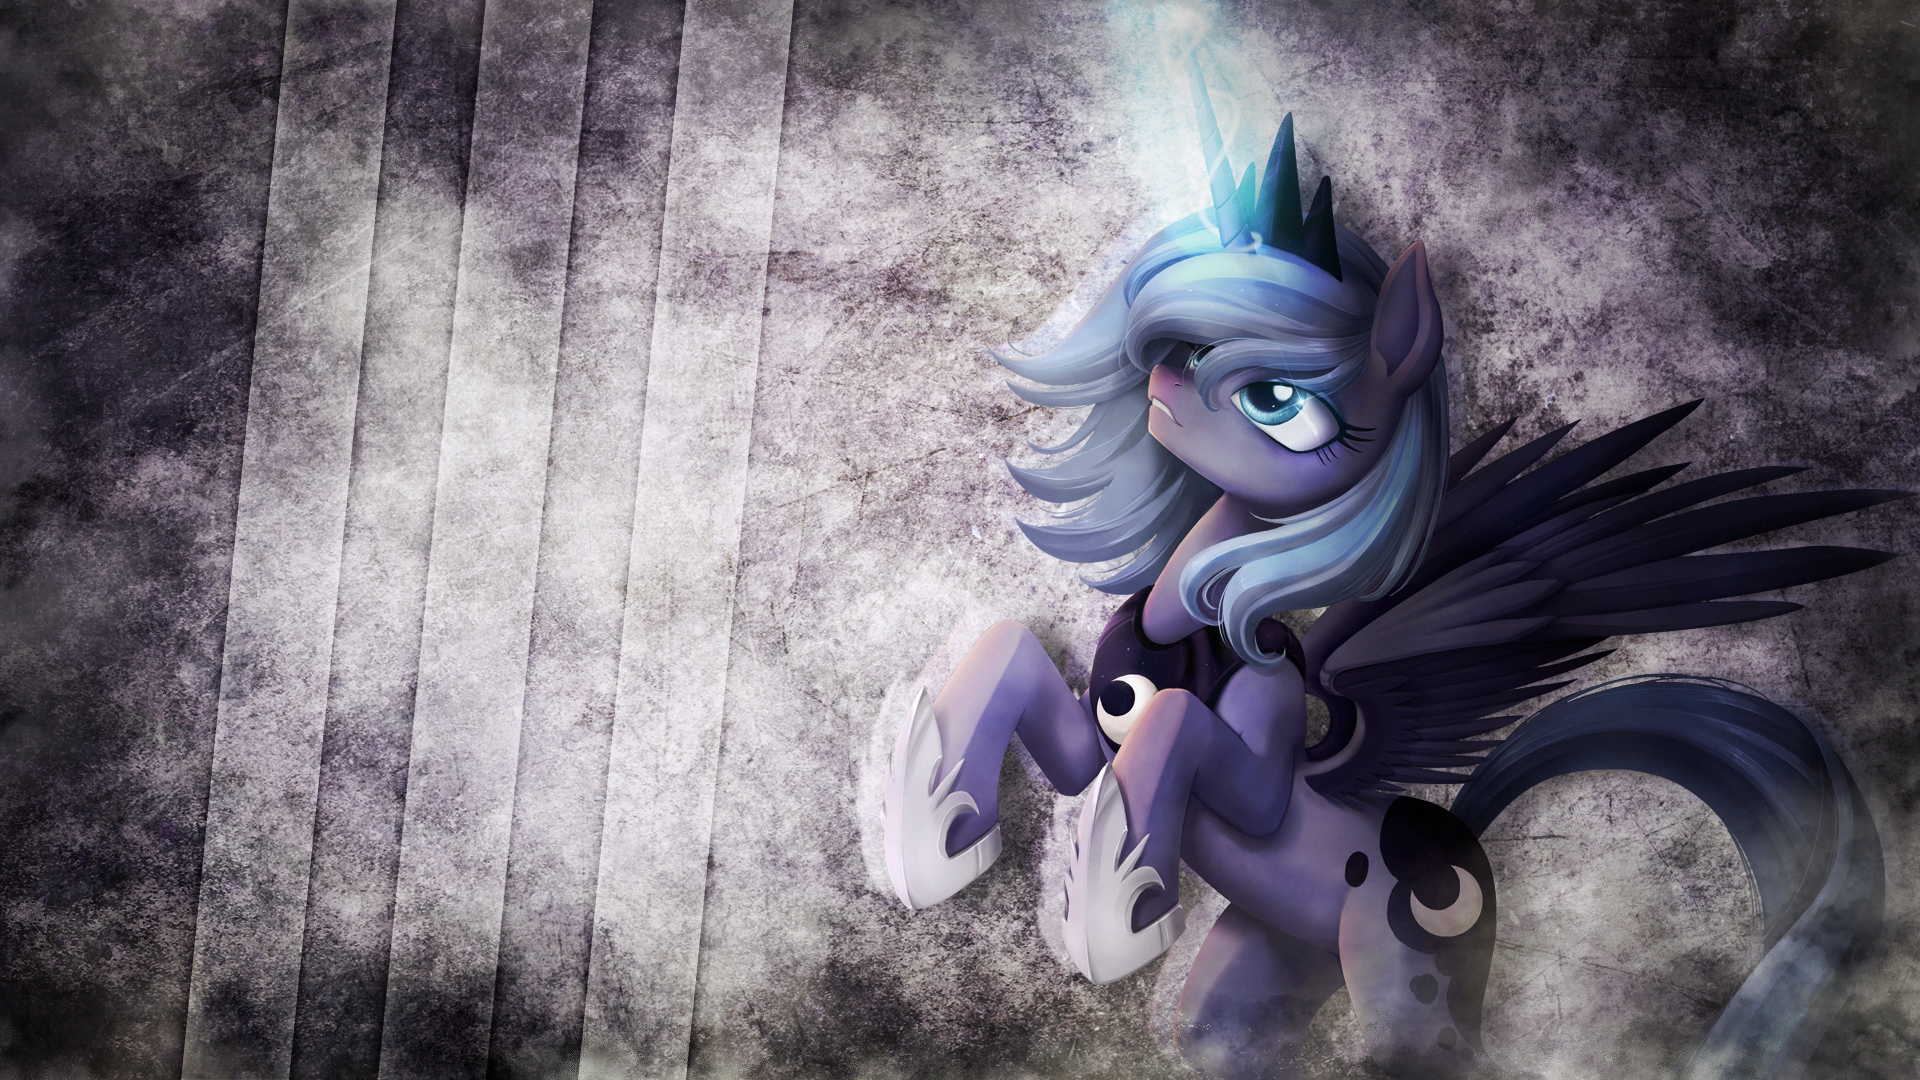 Wallpaper ~ Our Pretty Dictator. by Mackaged and ponyKillerX